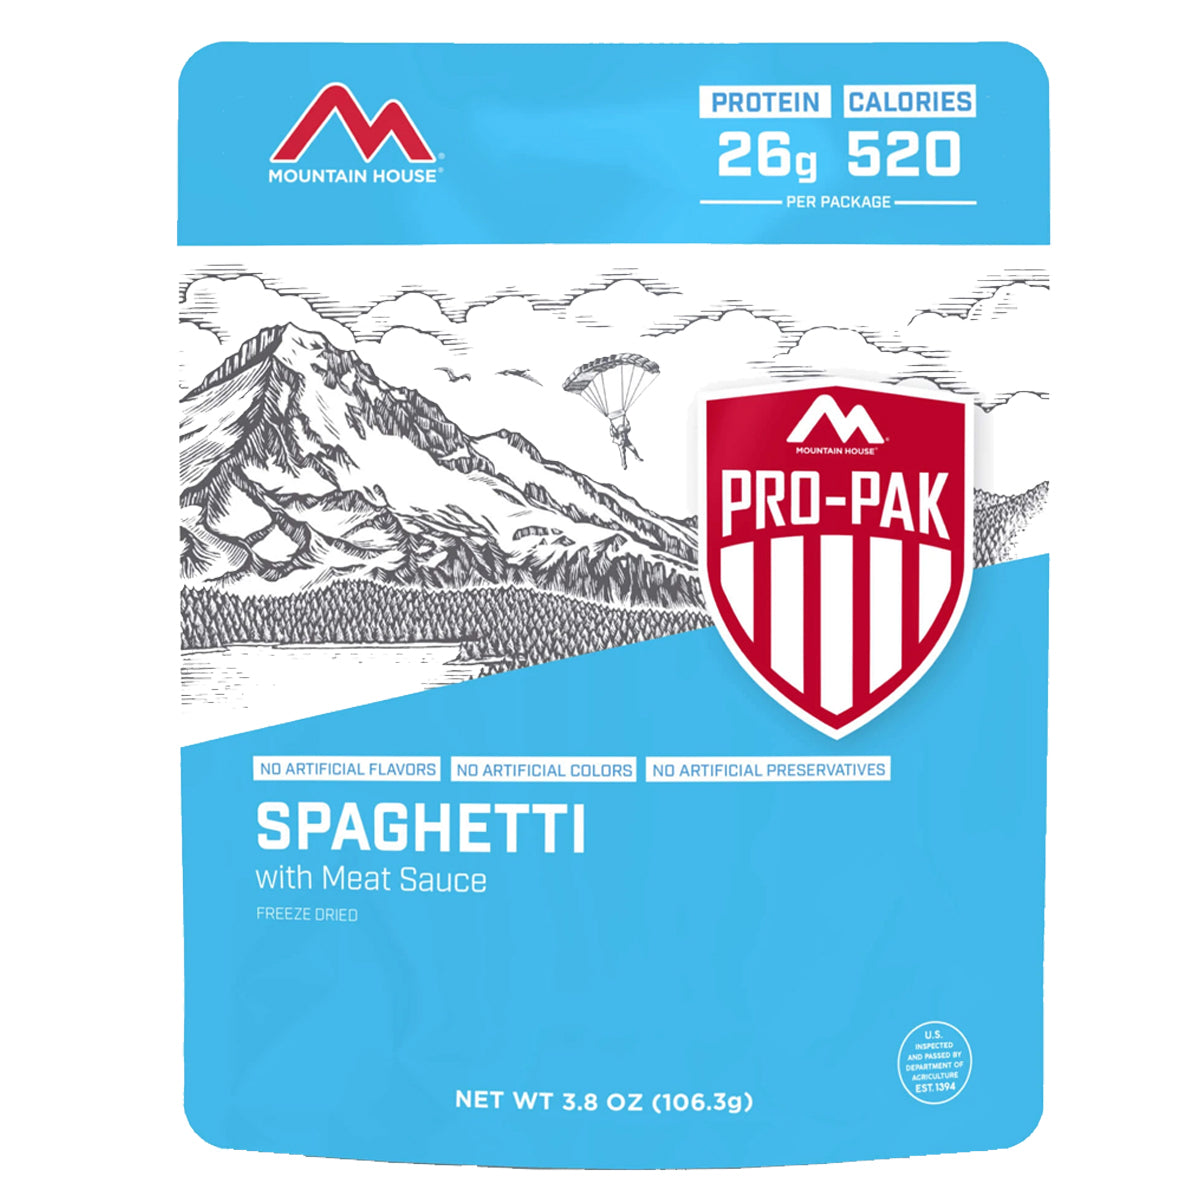 Mountain House Classic Spaghetti & Meat Sauce Pro-Pak in  by GOHUNT | Mountain House - GOHUNT Shop